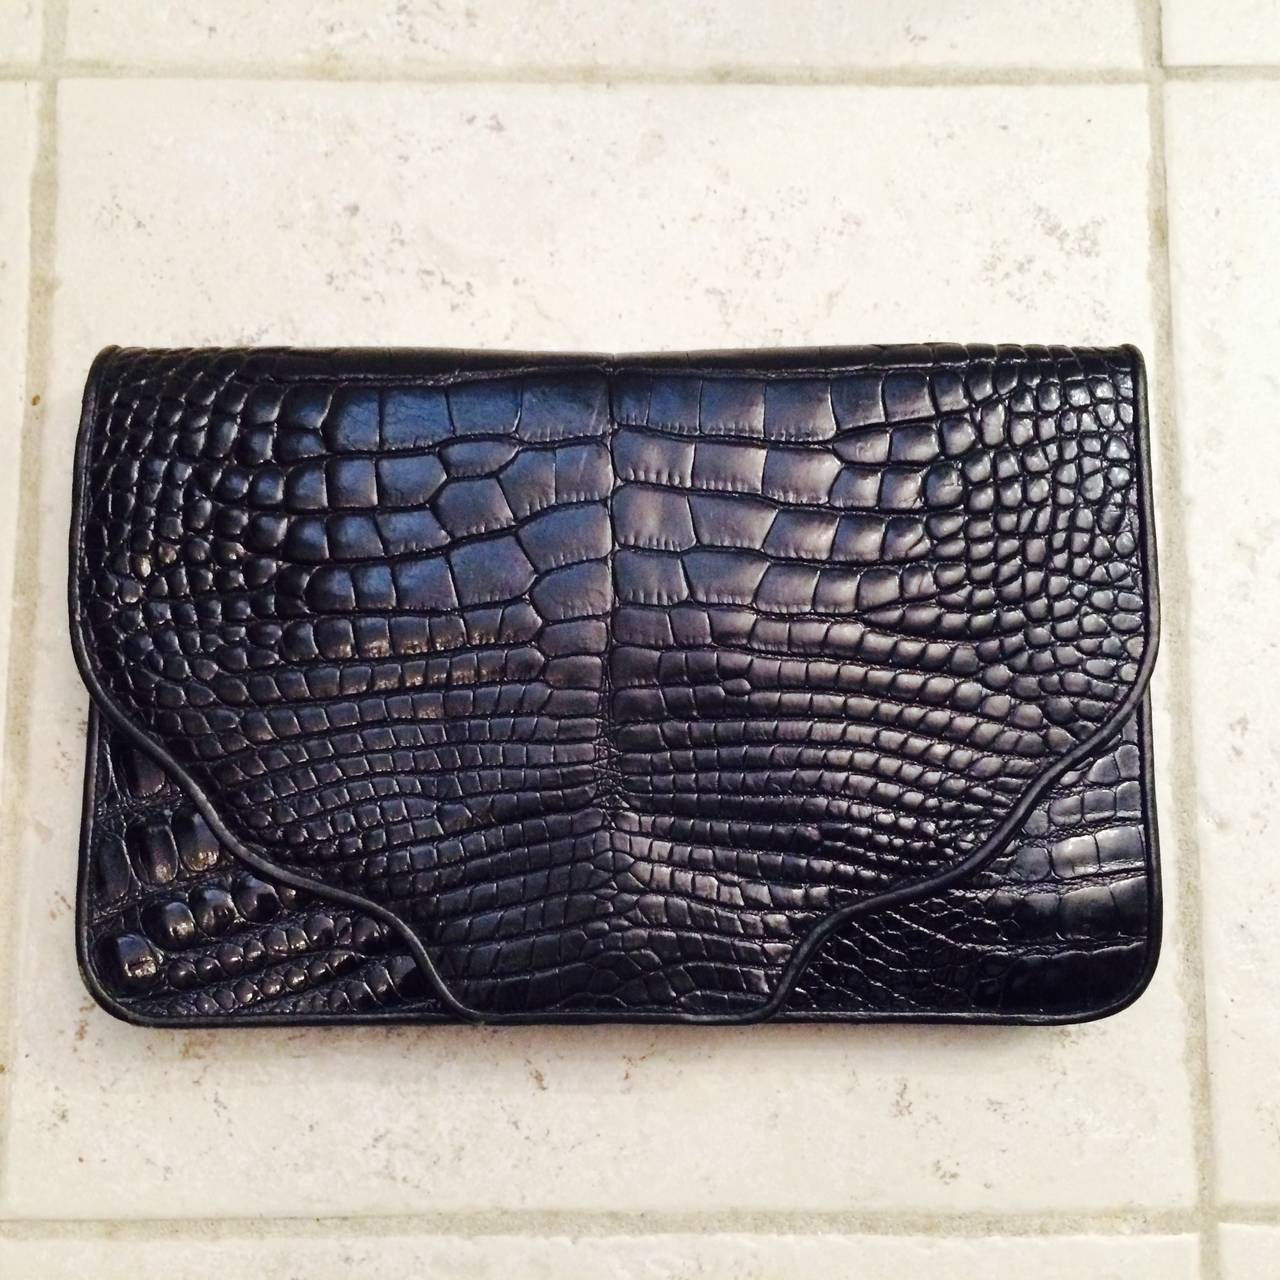 Large size black alligator envelope clutch handbag from the 1980s by Varon...Deep front flap closure with hidden snap...The front and back of this bag are alligator, the hidden side vents are pressed black leather...The bag is trimmed in black